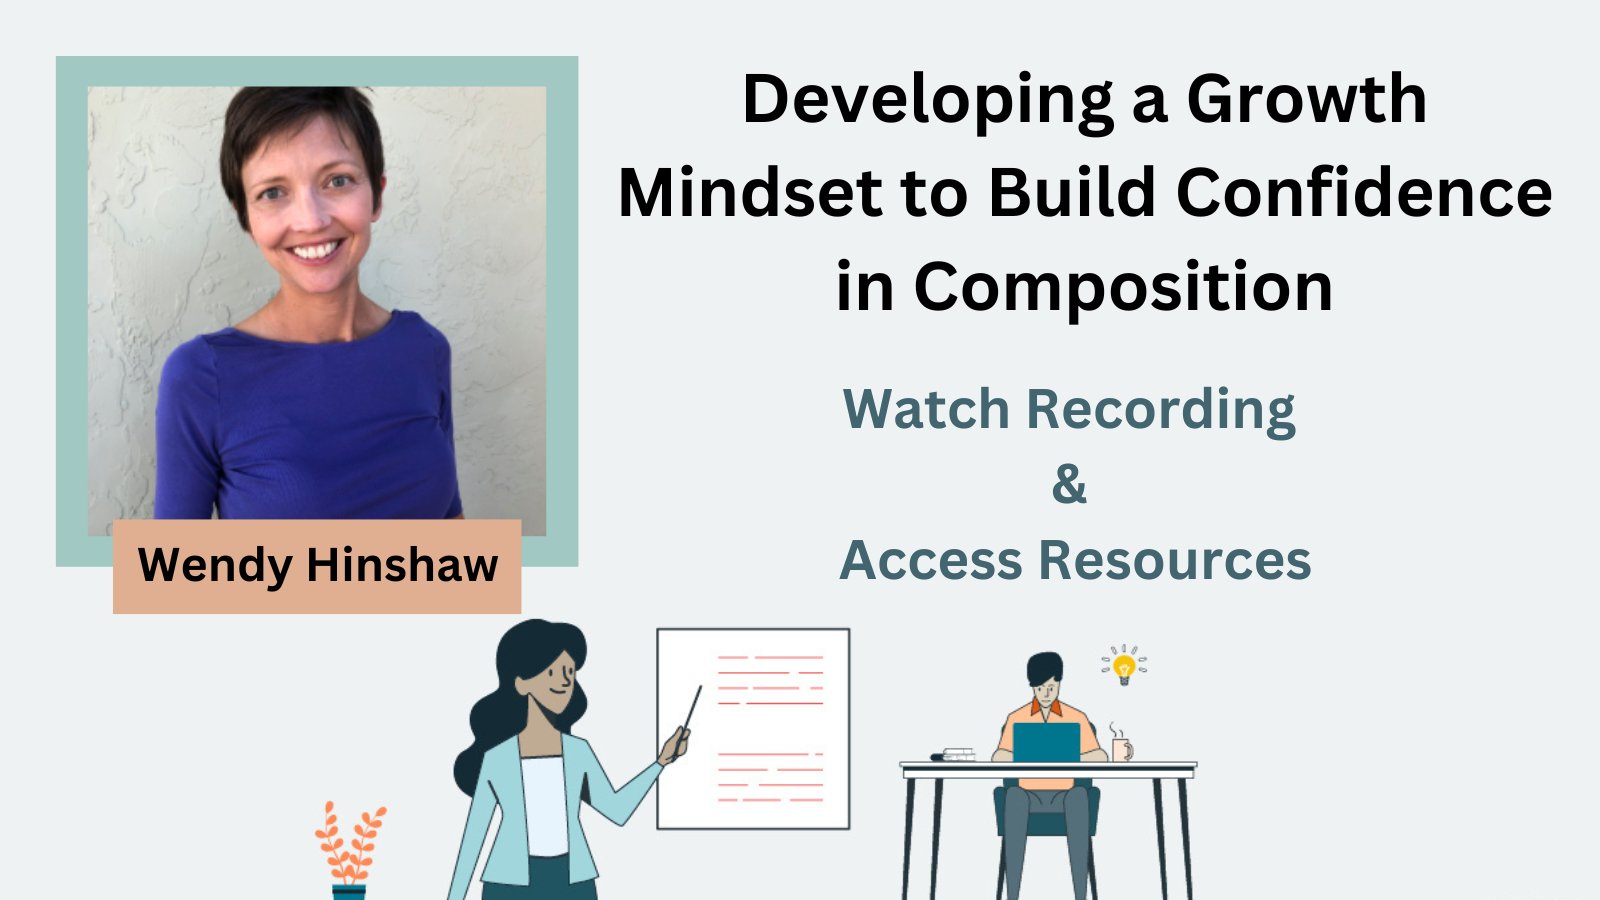 Developing a Growth Mindset to Build Confidence in Composition